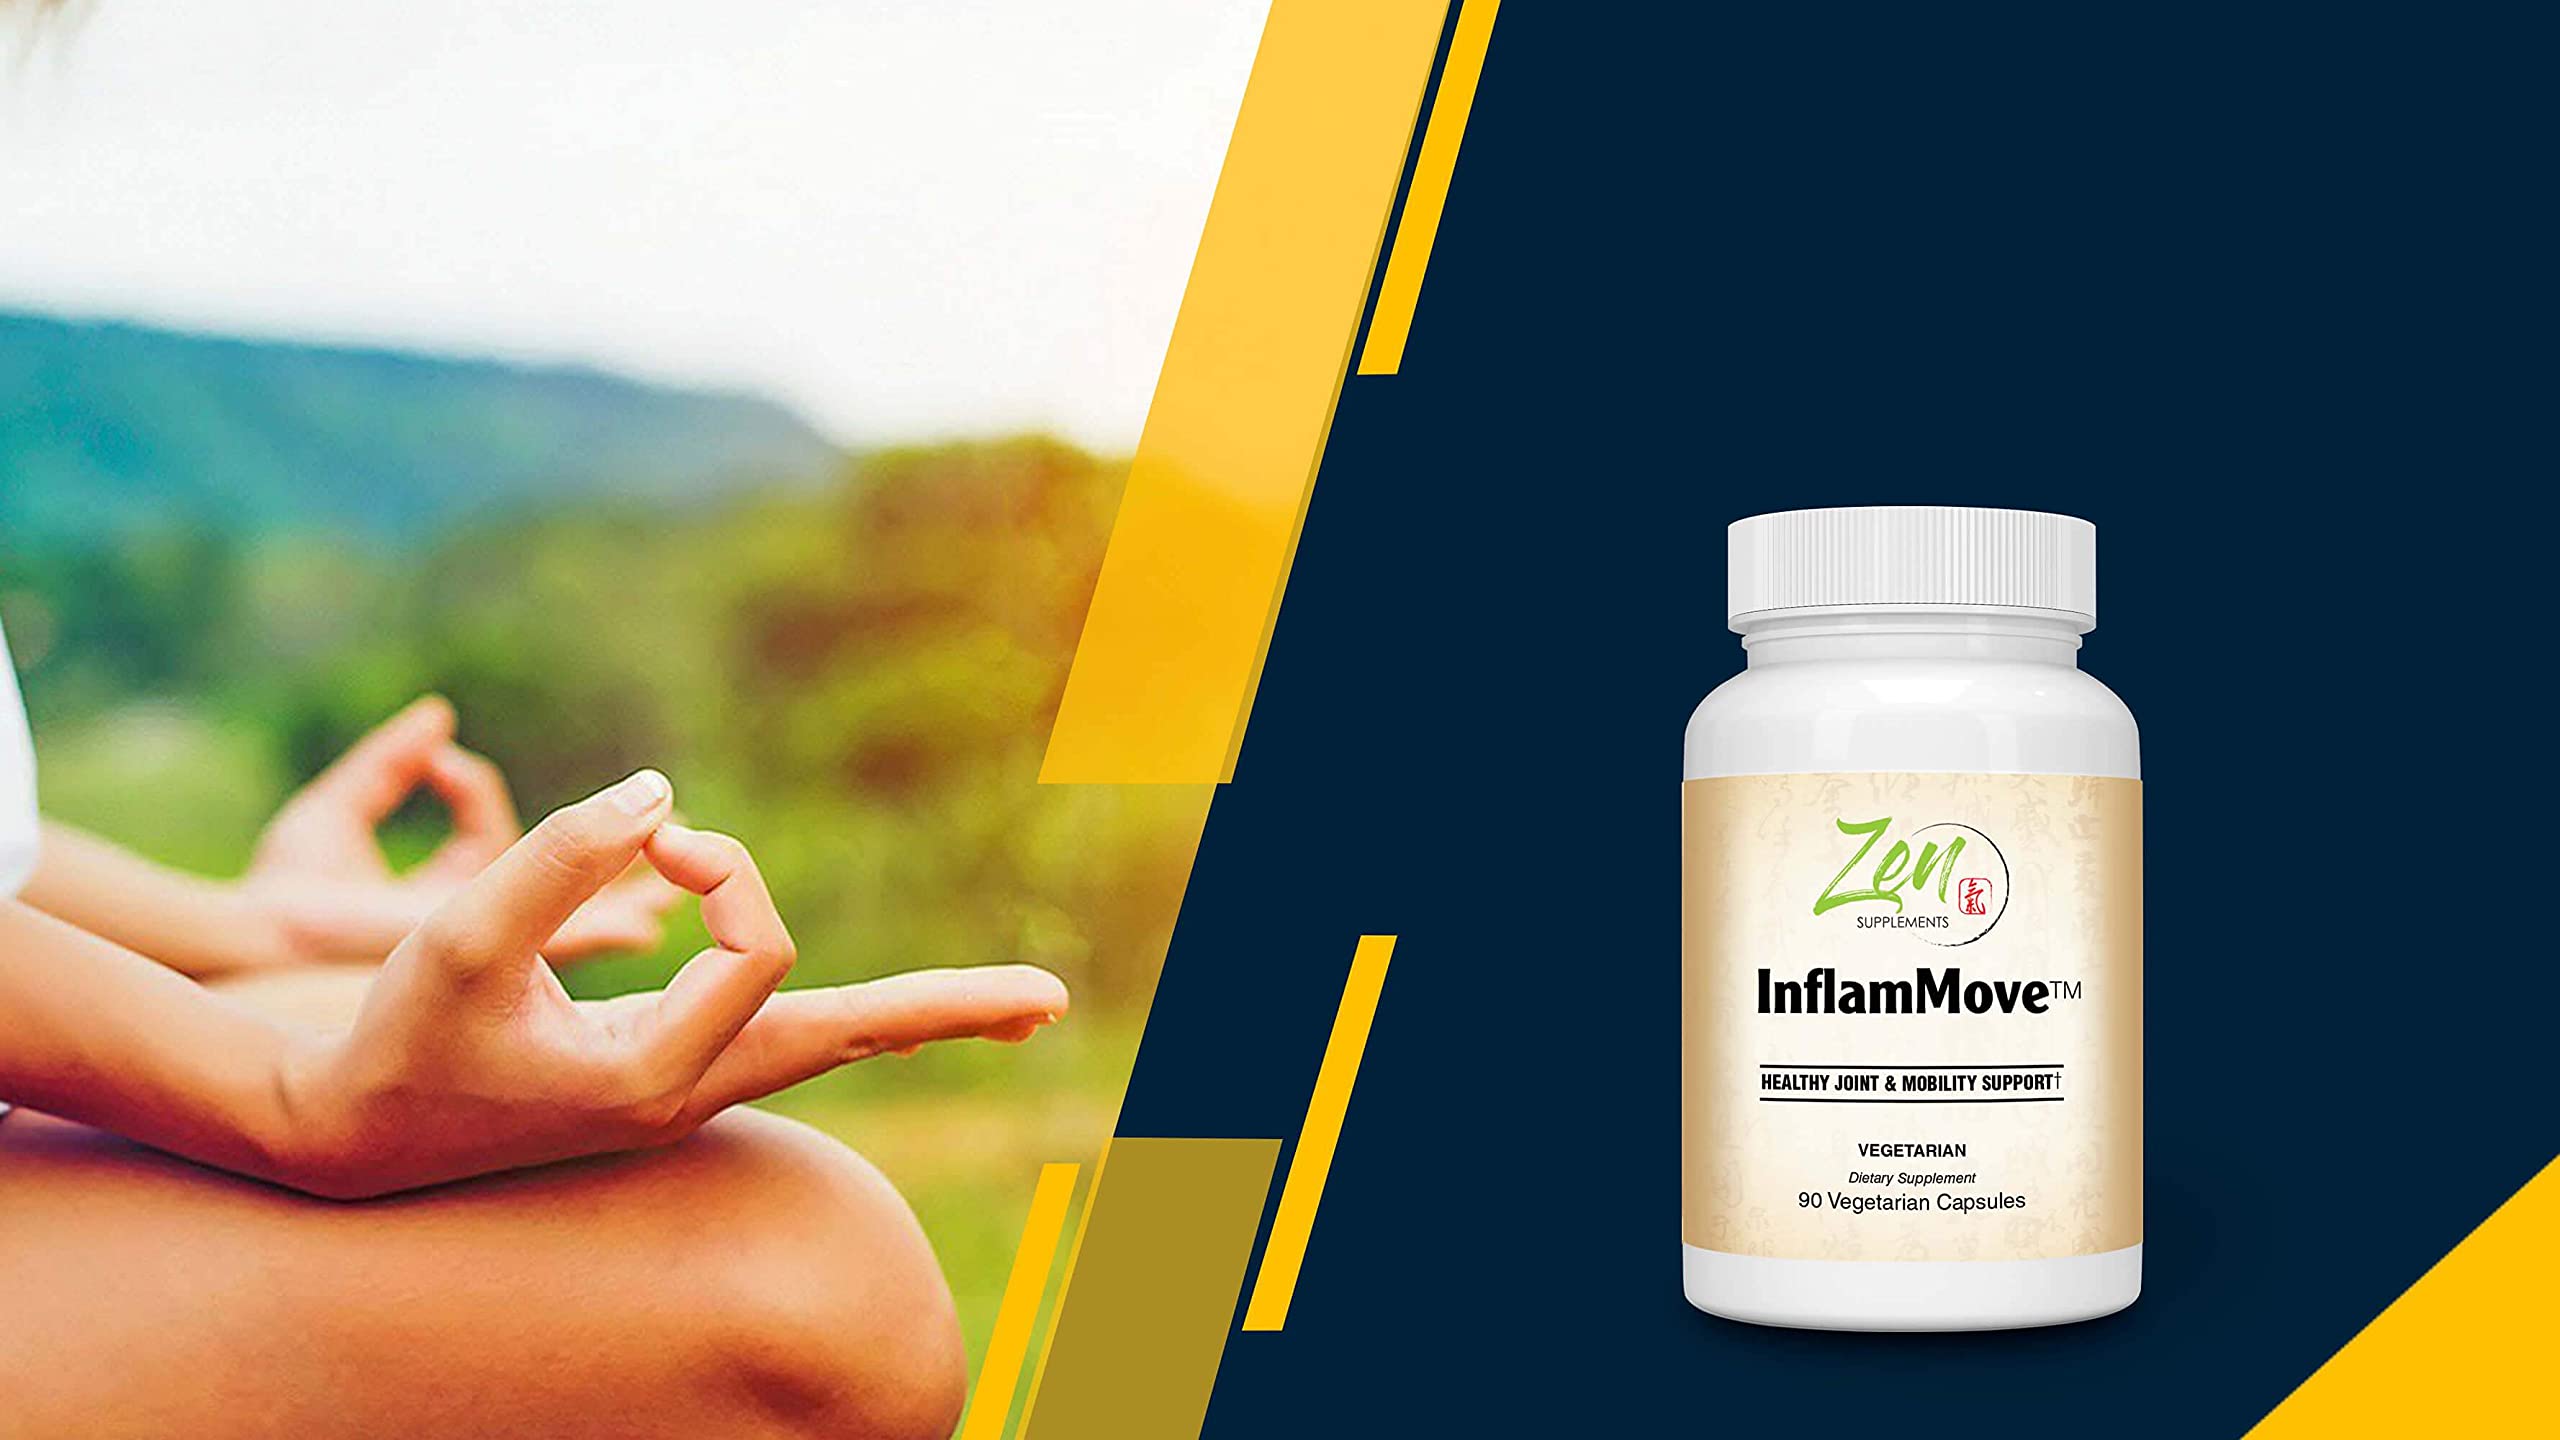 Zen Supplements - Inflammove Enzyme and Herbal Blend Contains Turmeric, Boswellia, Ginger, White Willow & Devil's Claw90-Vegcaps